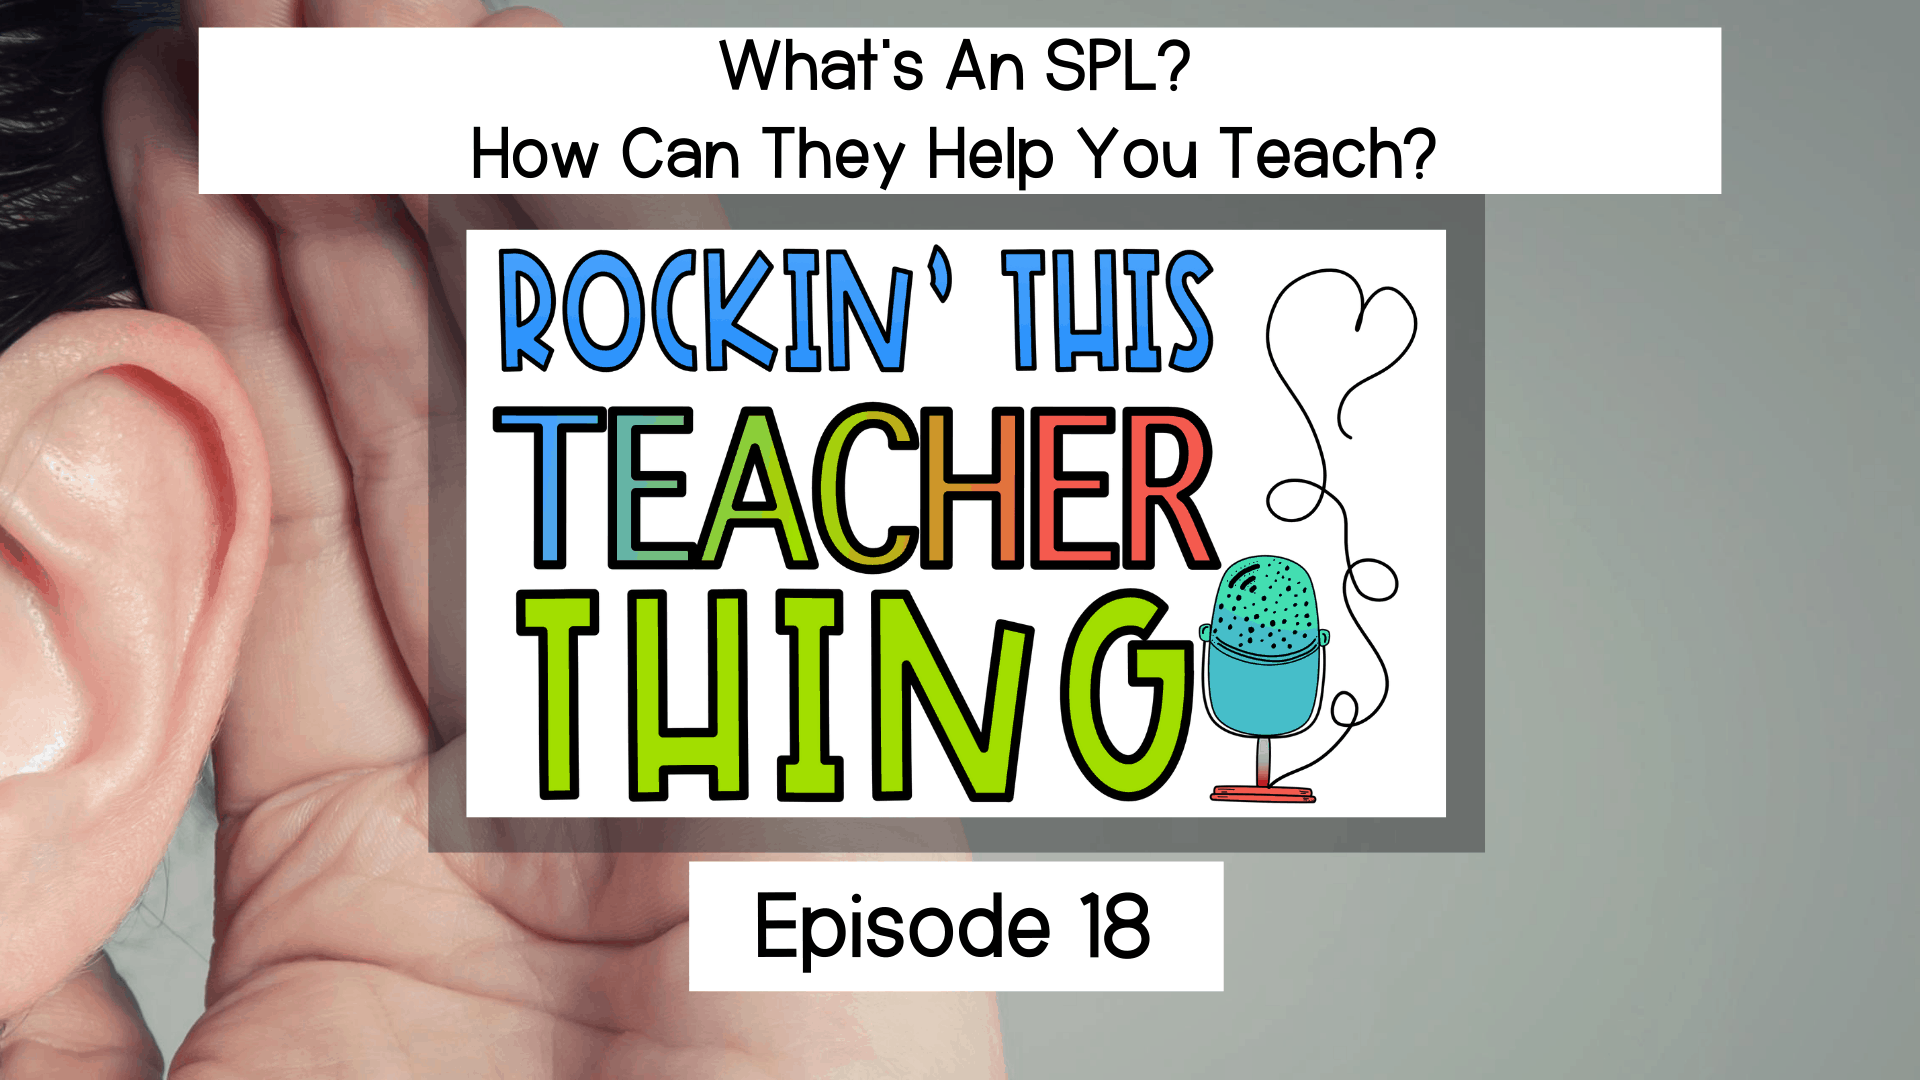 Title: What's An SLP? How Can They Help You Teacher?